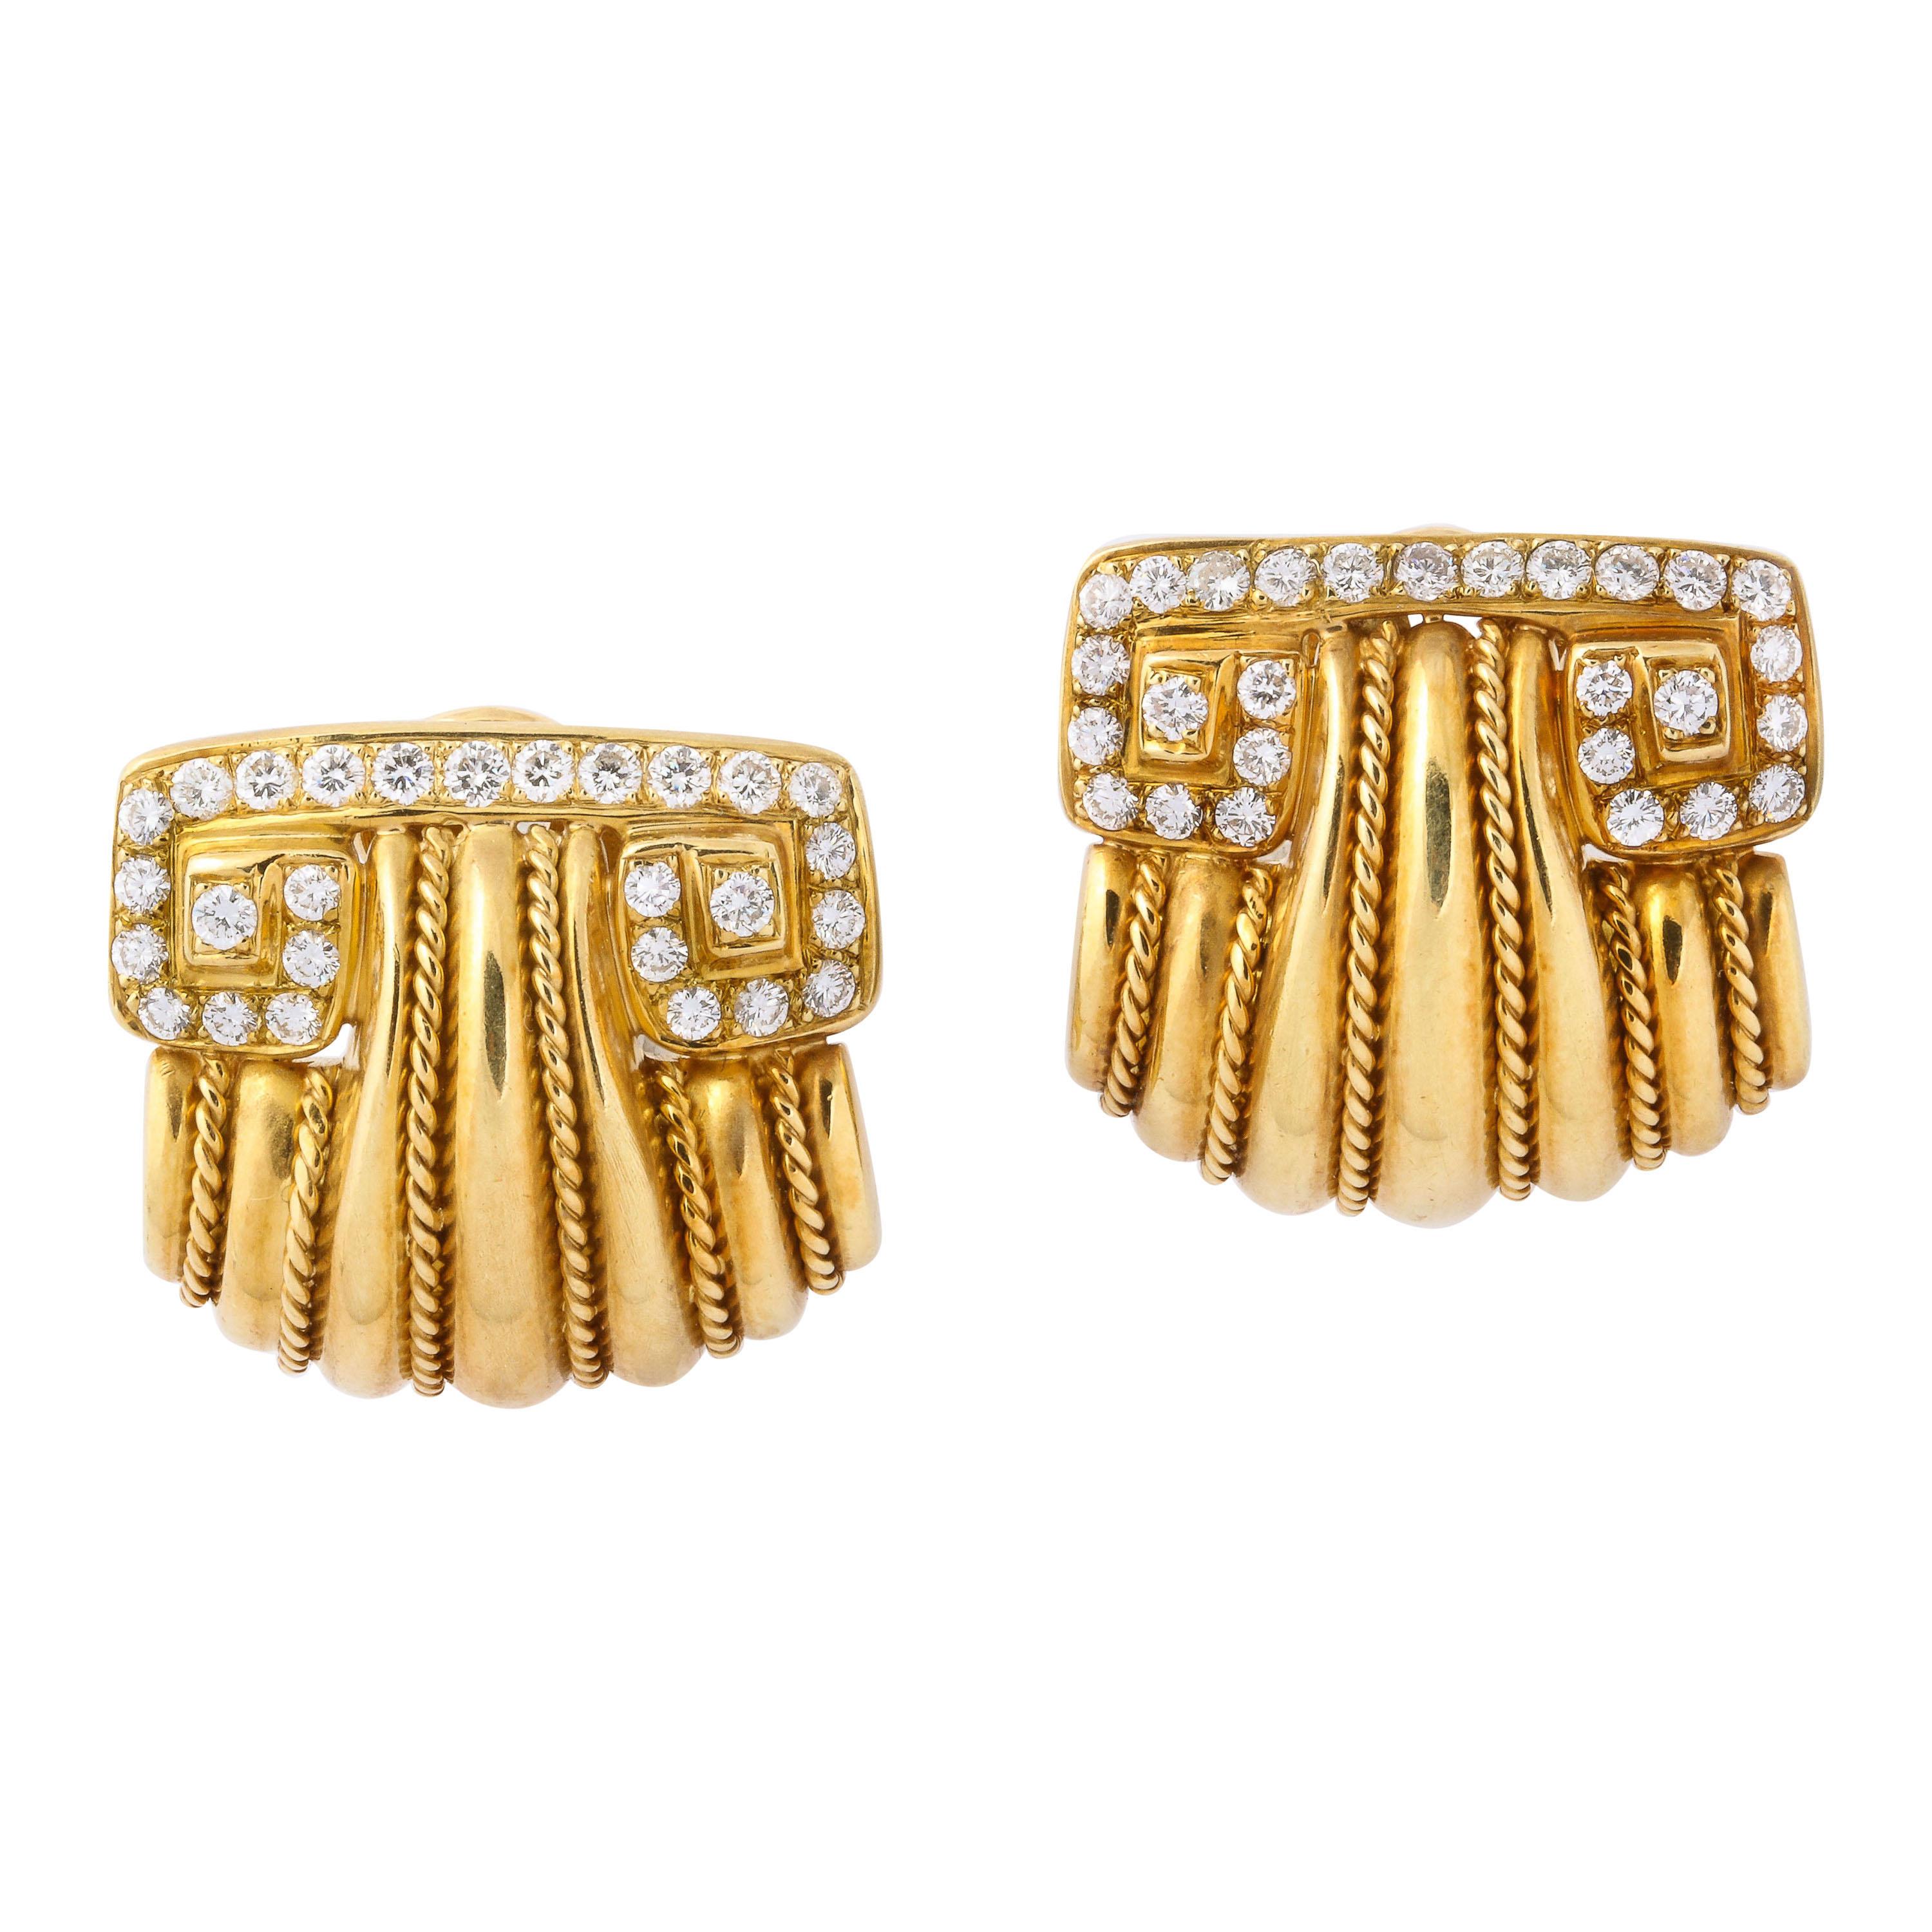 Yellow Gold & Diamond Clip On Earrings in Grecian Revival Style